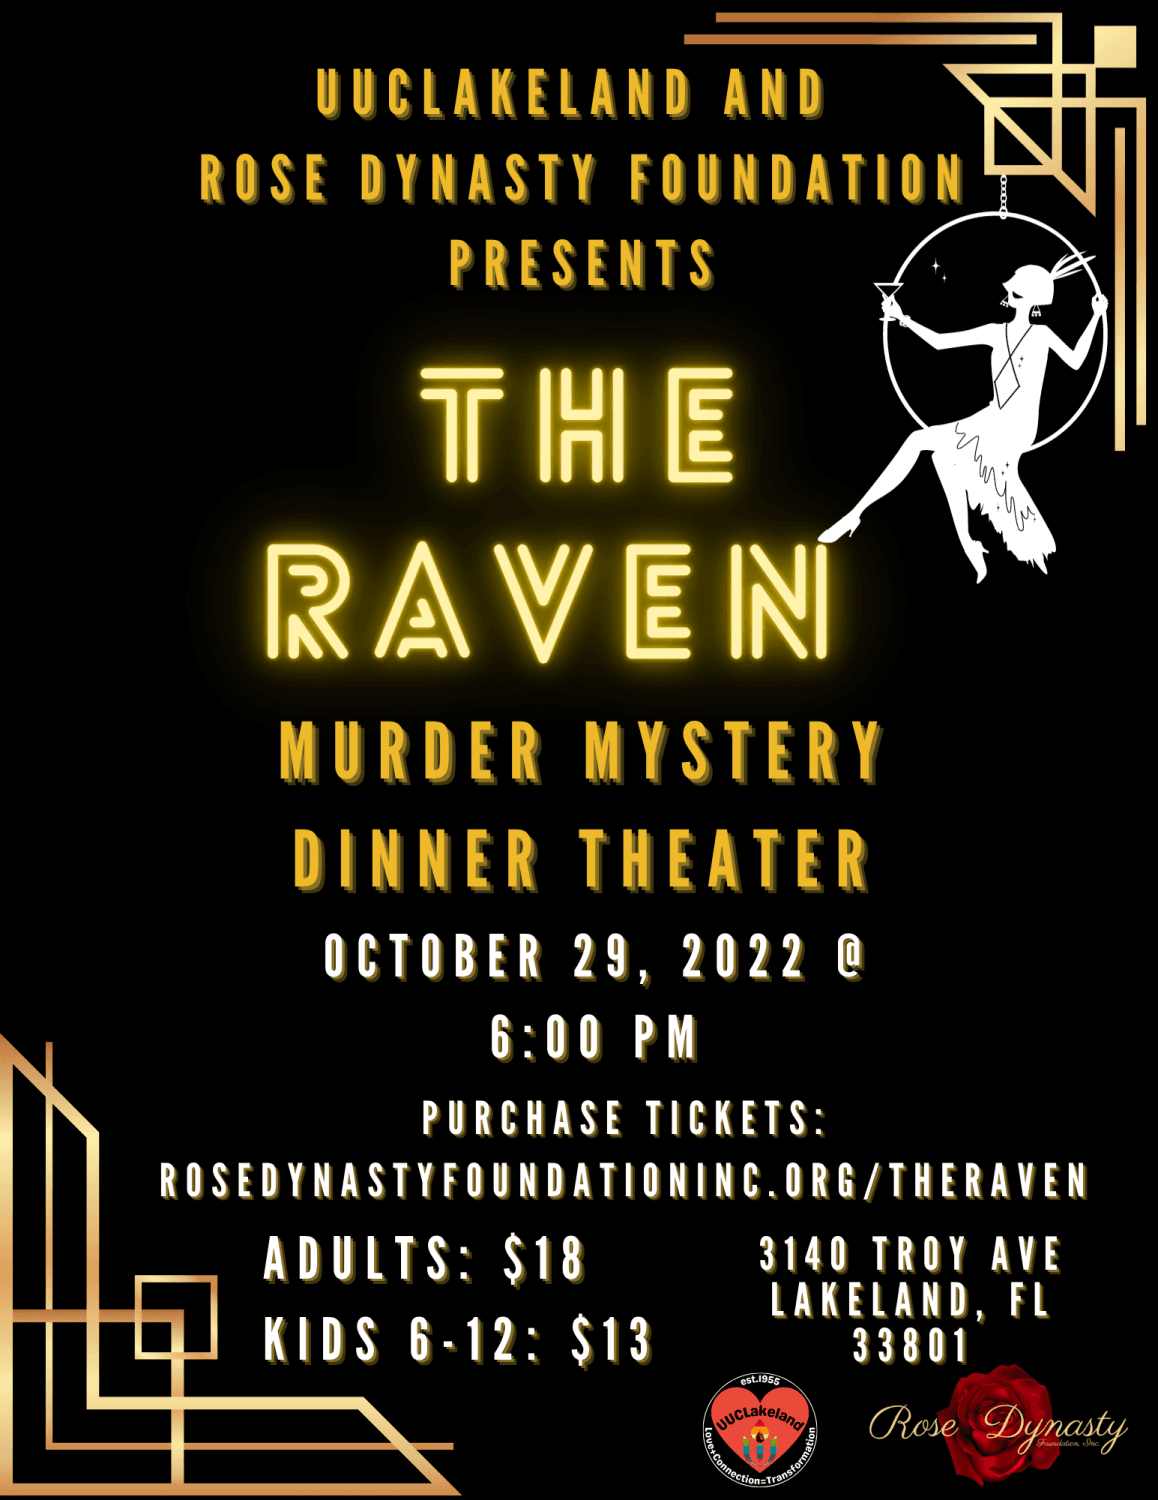 The Raven Murder Mystery Dinner Theater
Sat Oct 29, 6:00 PM - Sat Oct 29, 10:00 PM
in 9 days